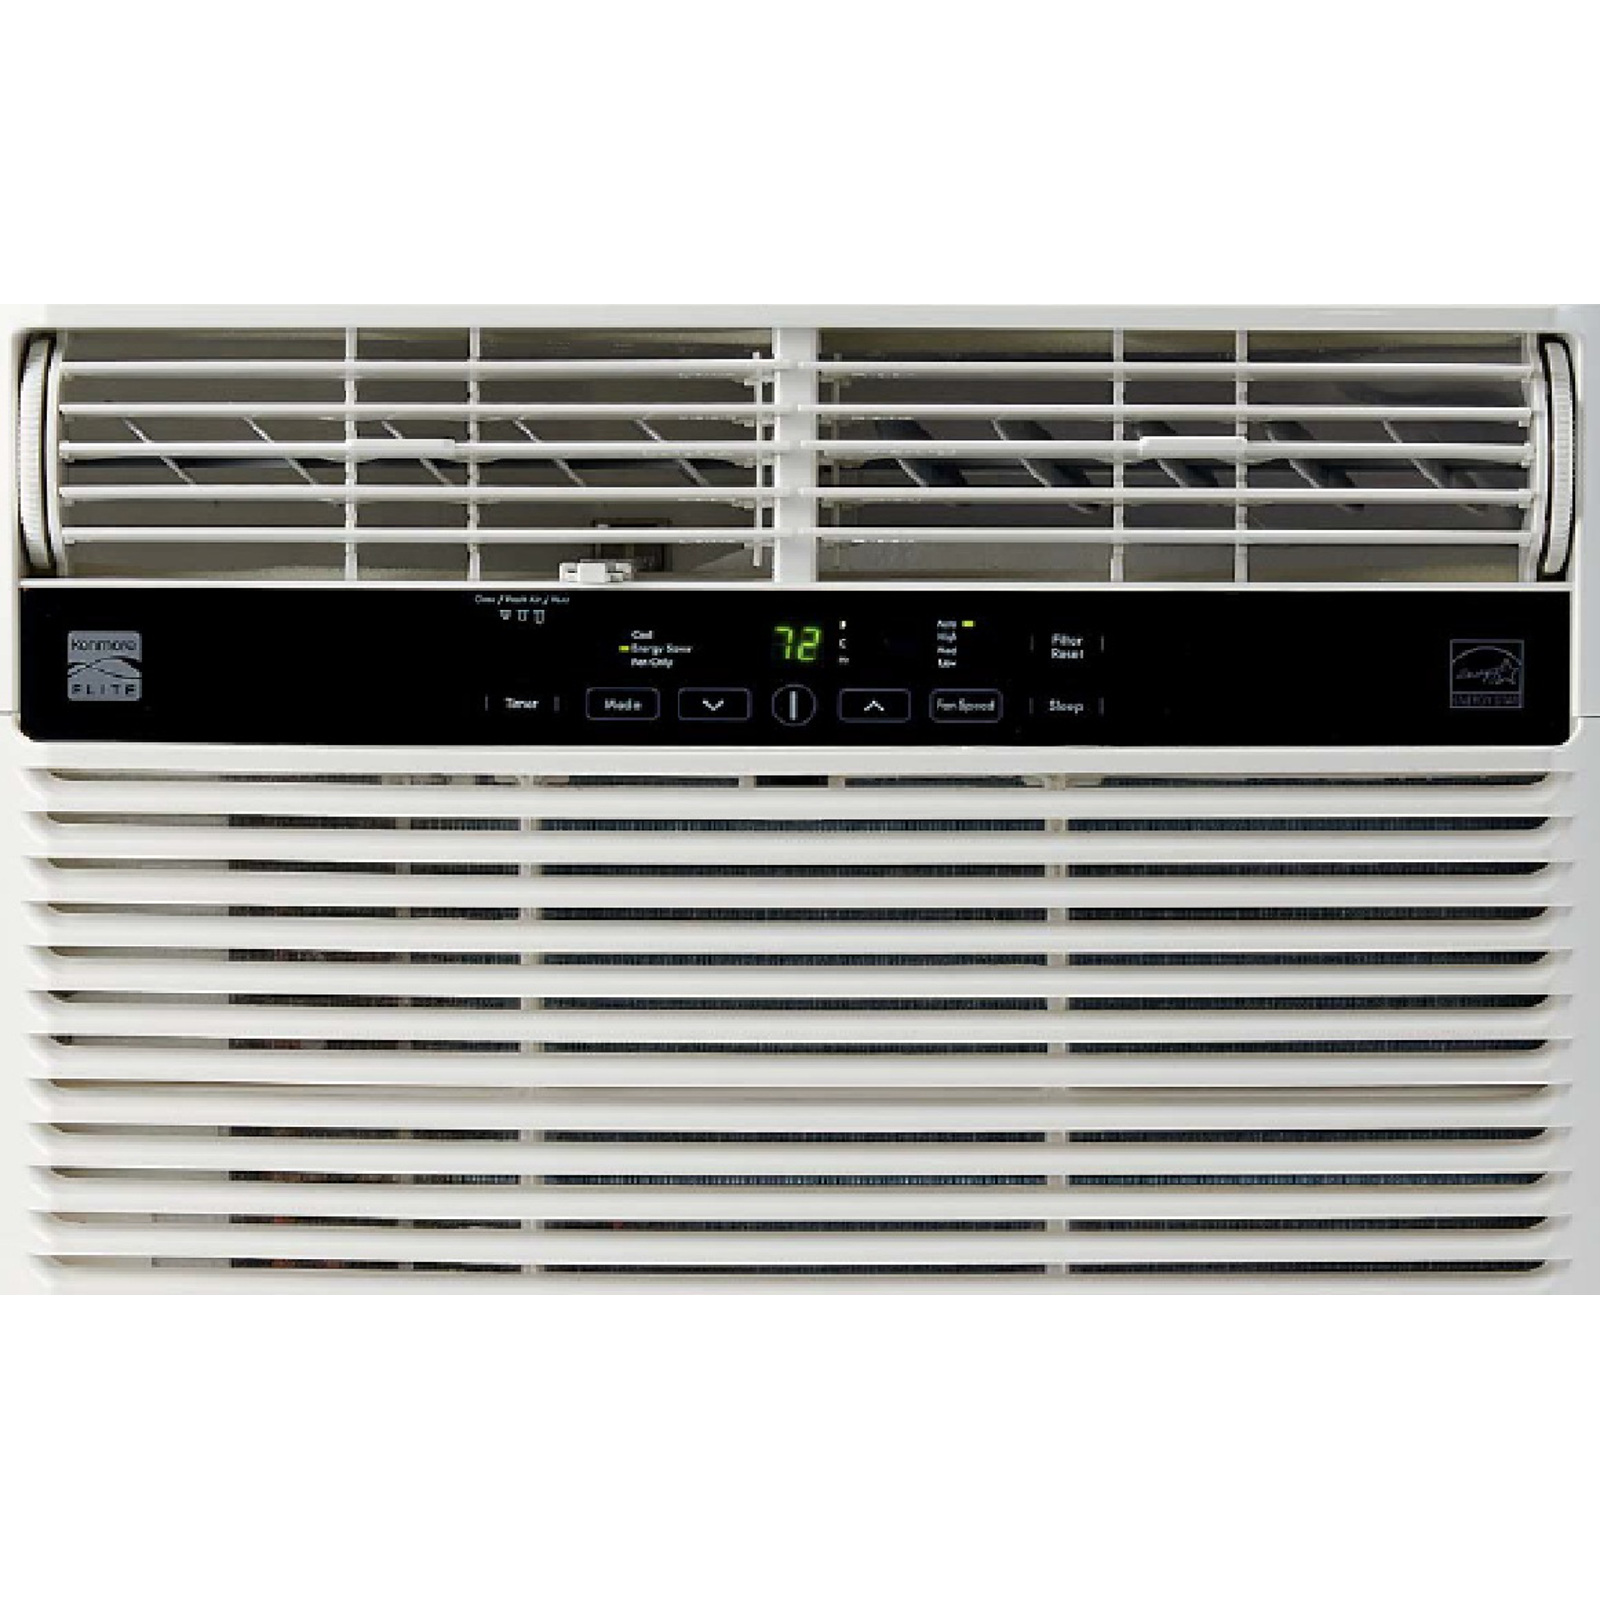 Can LG wall air conditioner units be used as heaters?